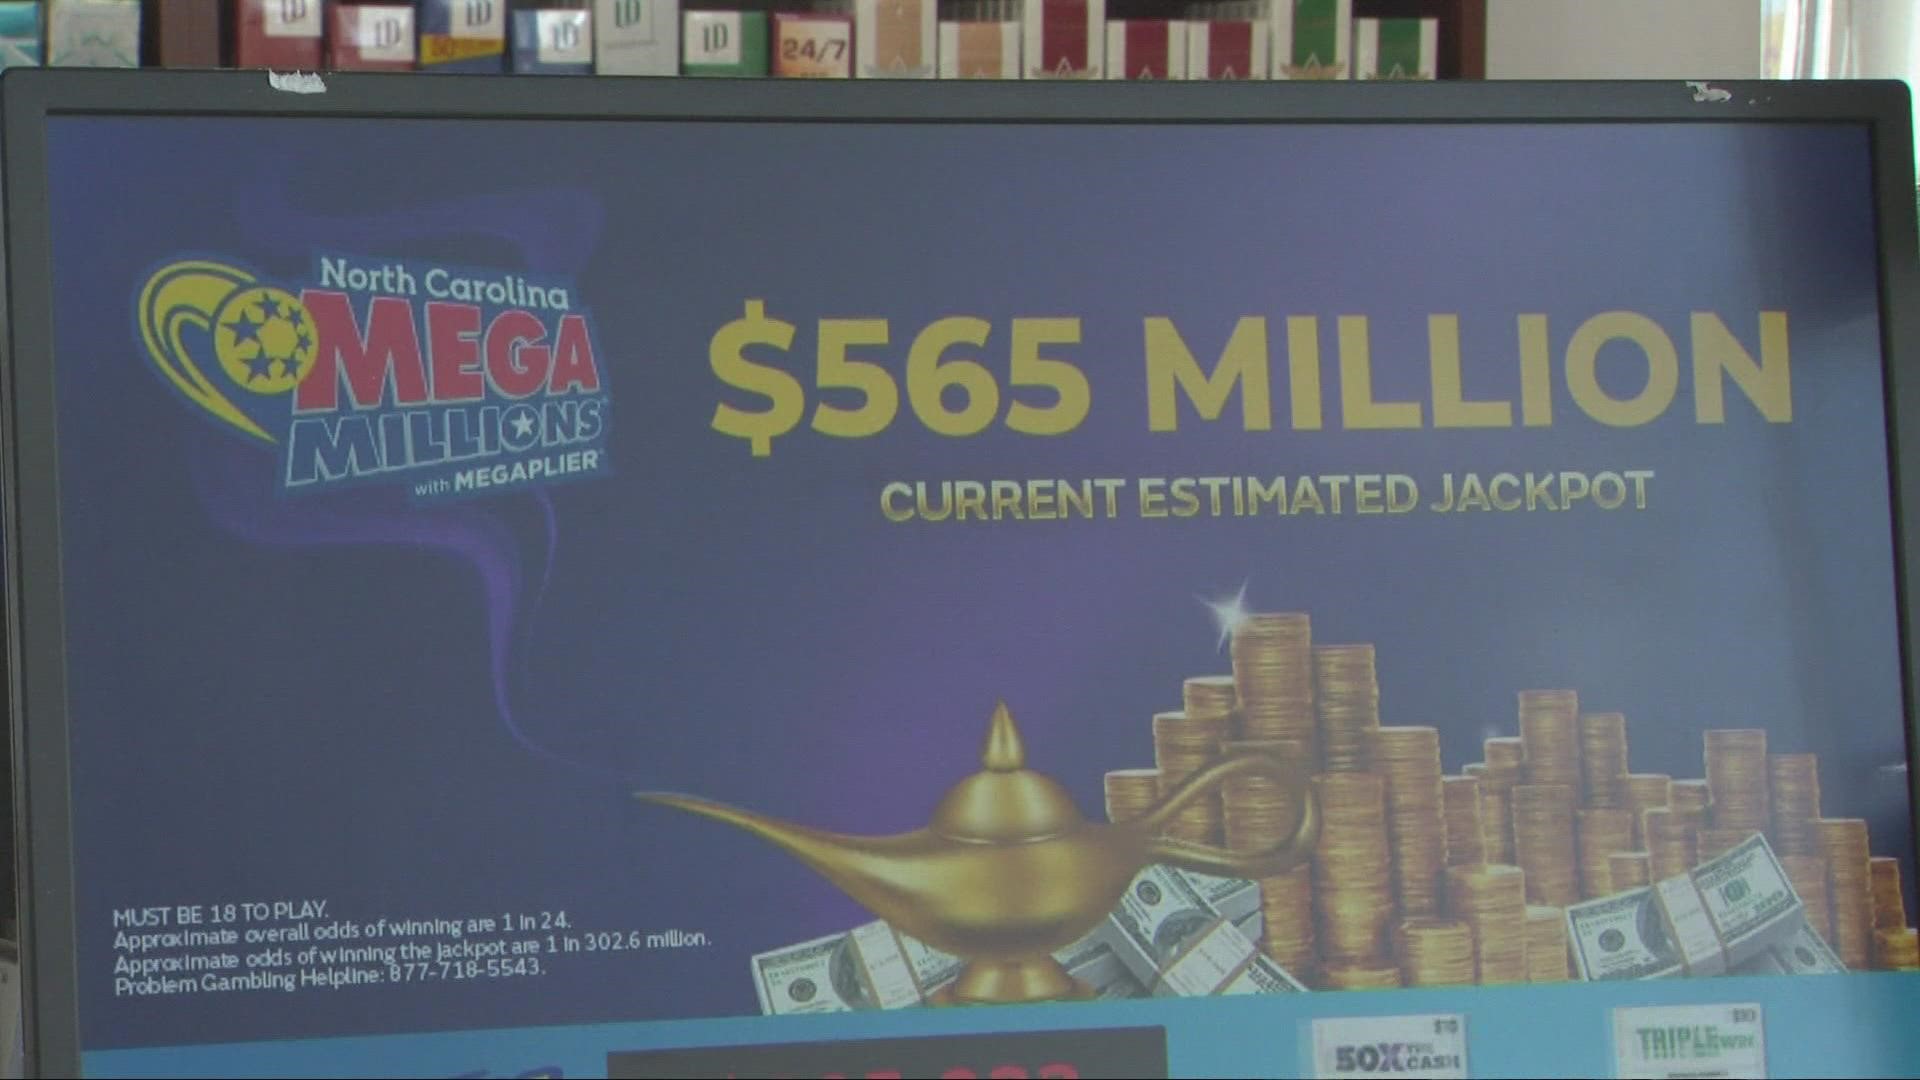 The Mega Millions jackpot currently sits at $640 million for Friday night's drawing.